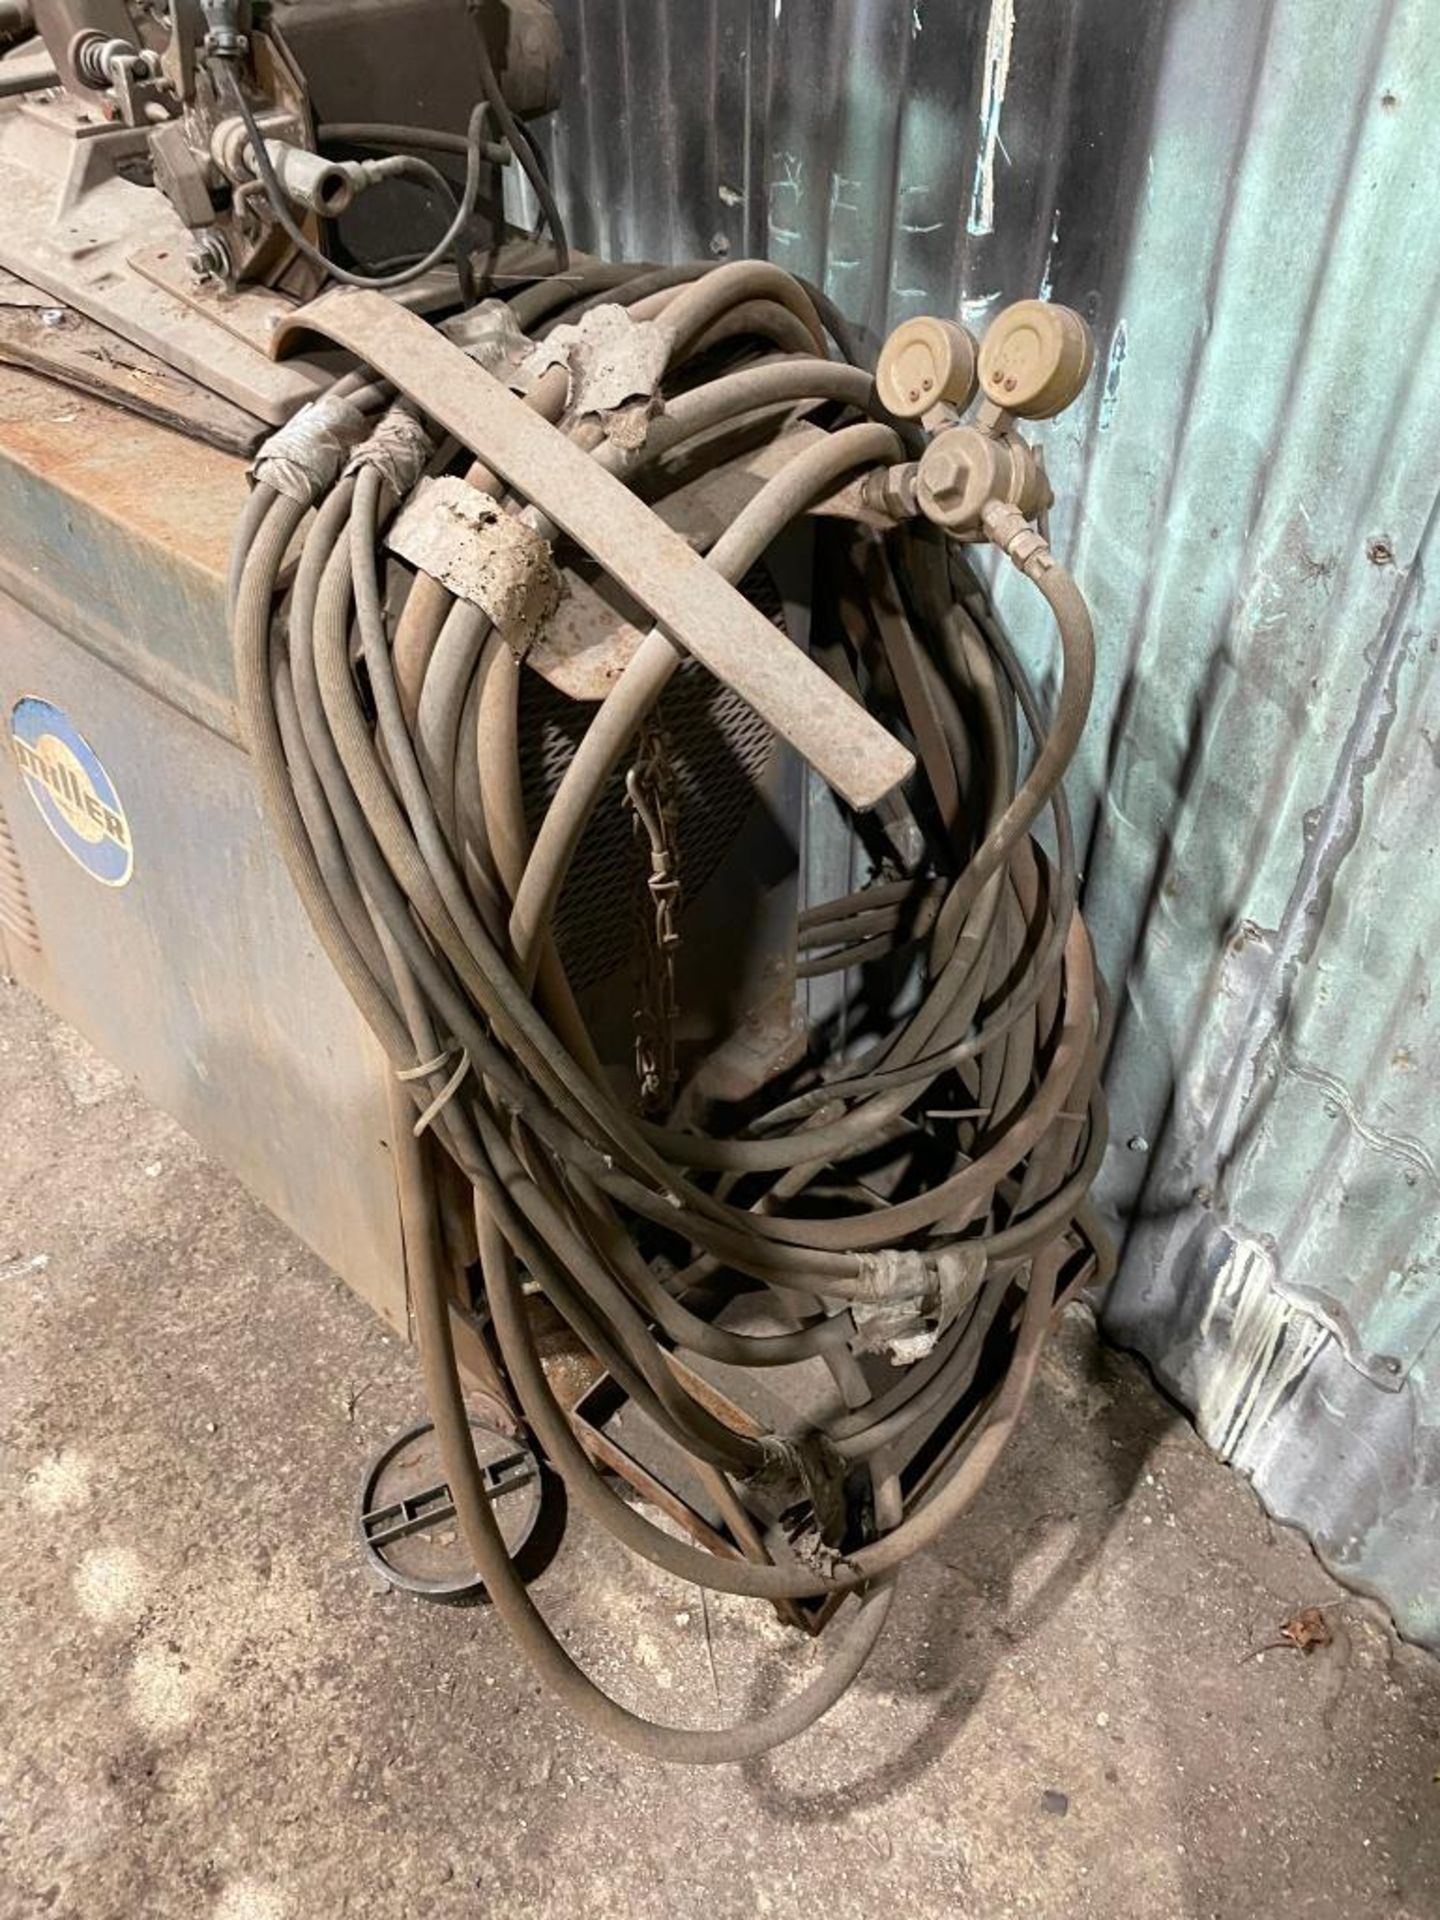 DESCRIPTION MILLER CP-300 DC ARC WELDING POWER SOURCE WELDER (NOT IN WORKING CONDITION, FOR PARTS) B - Image 7 of 8